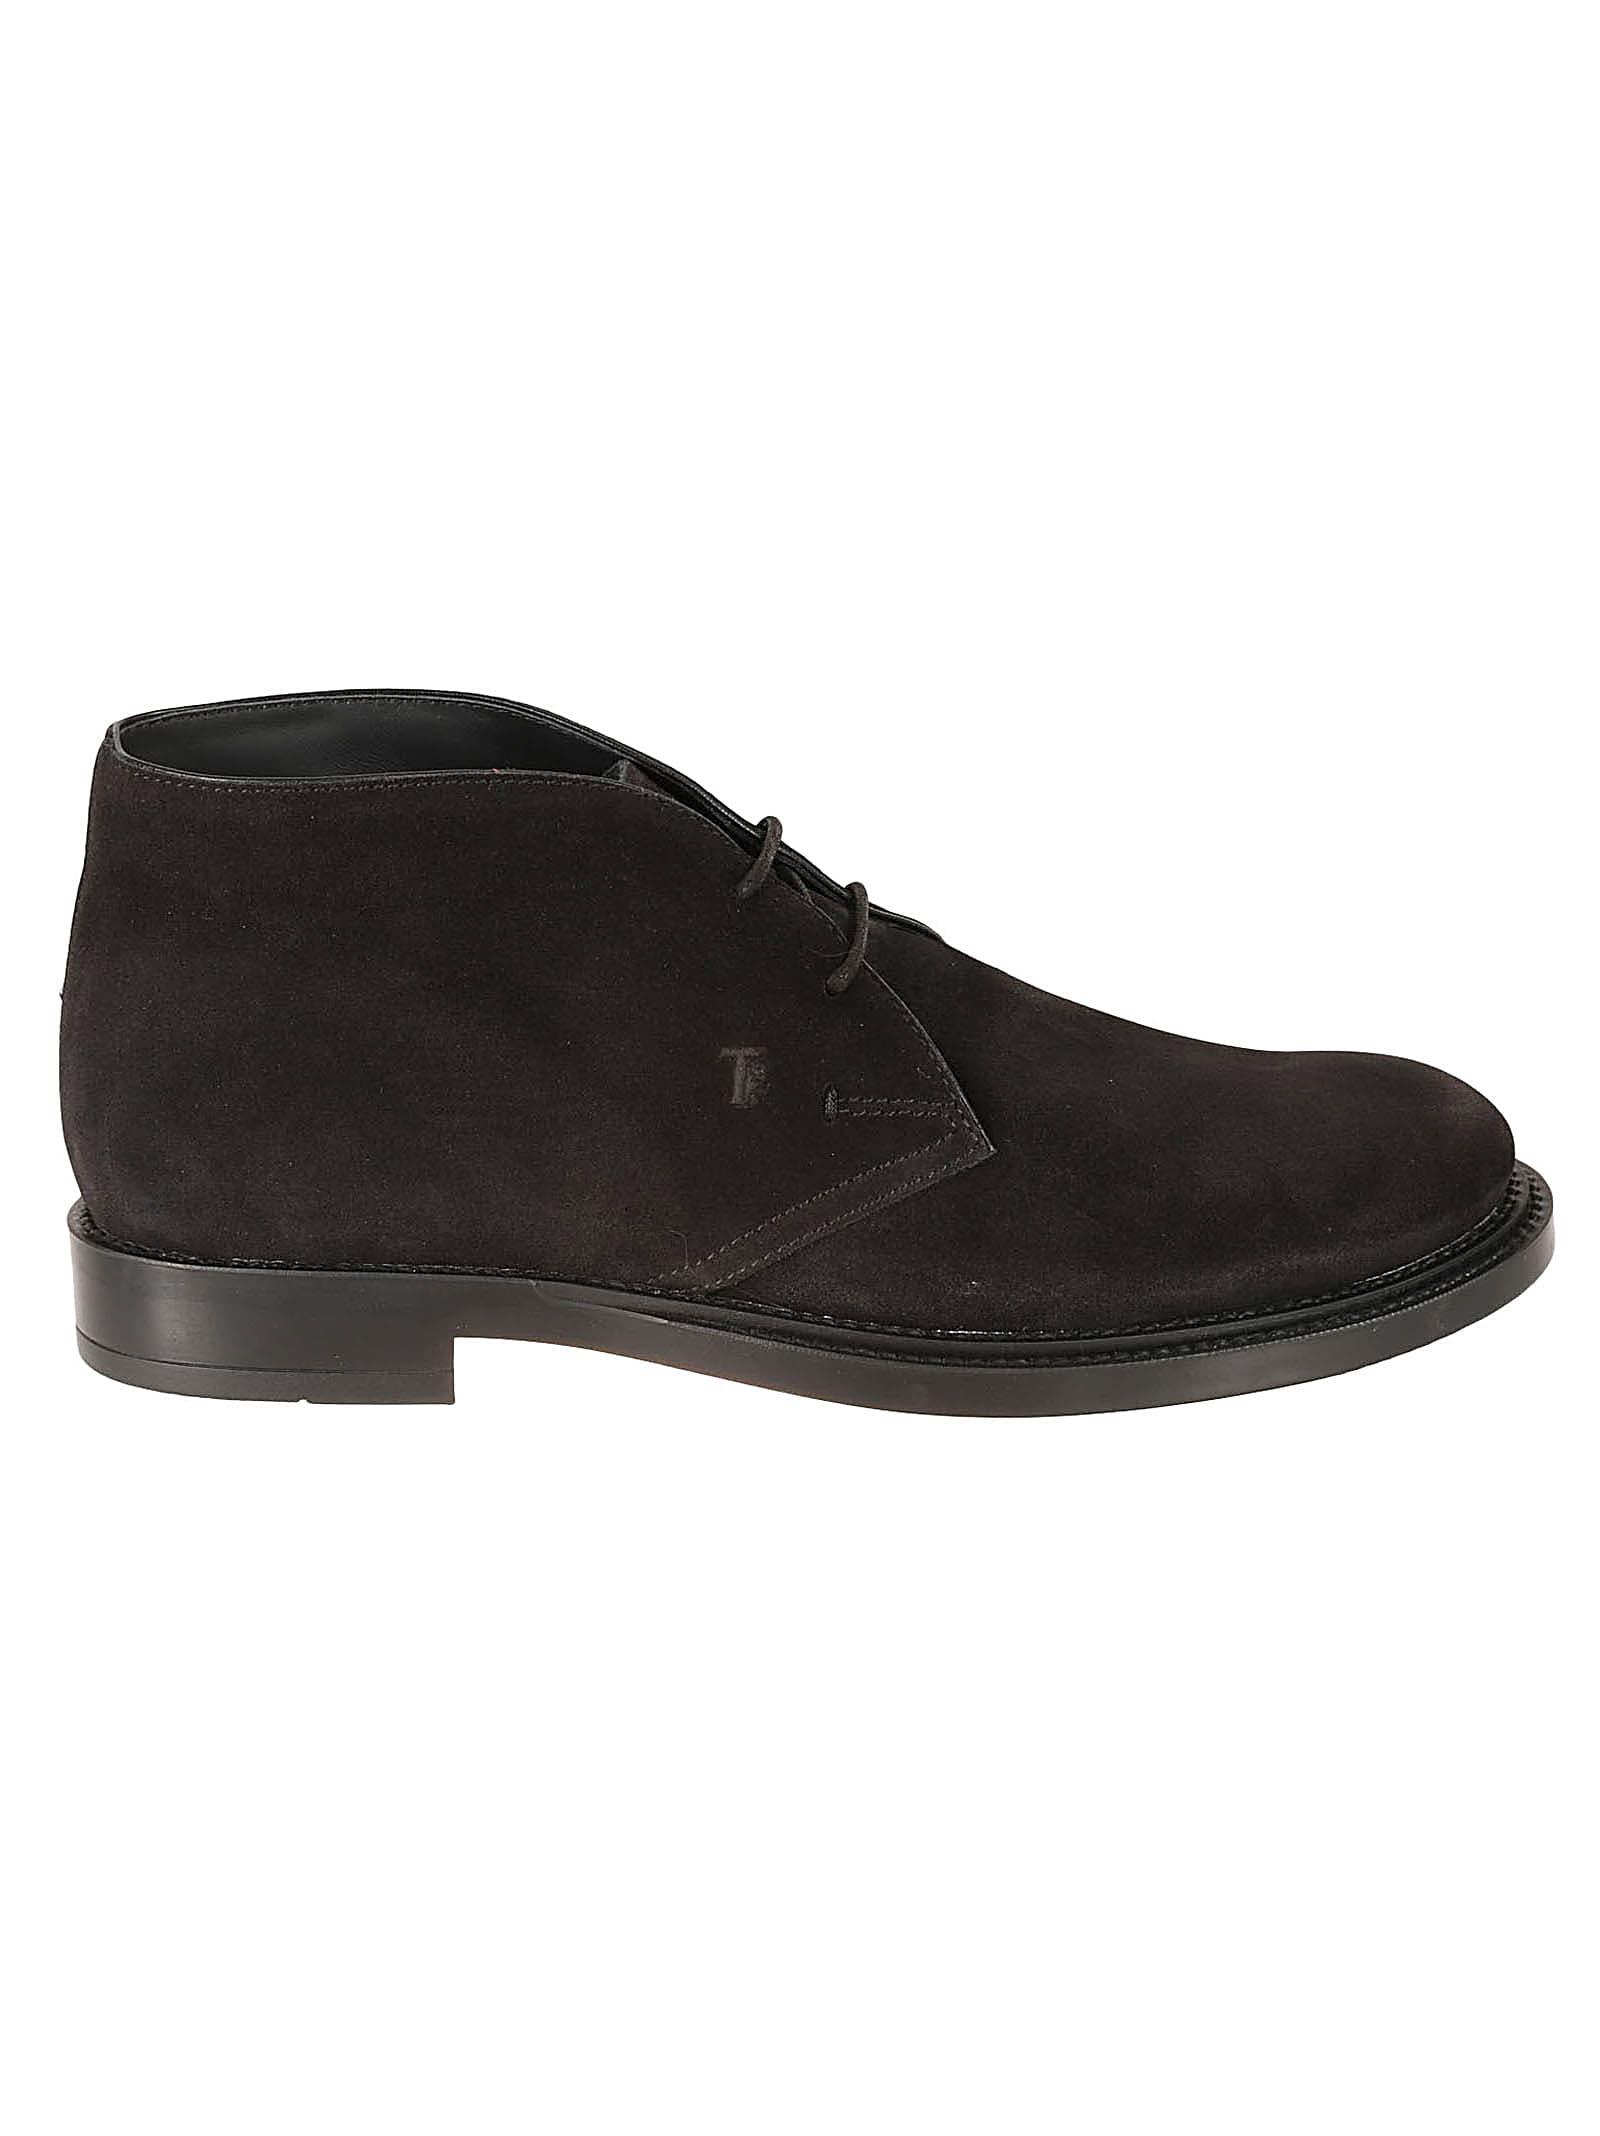 Formal 62c Lace-up Shoes